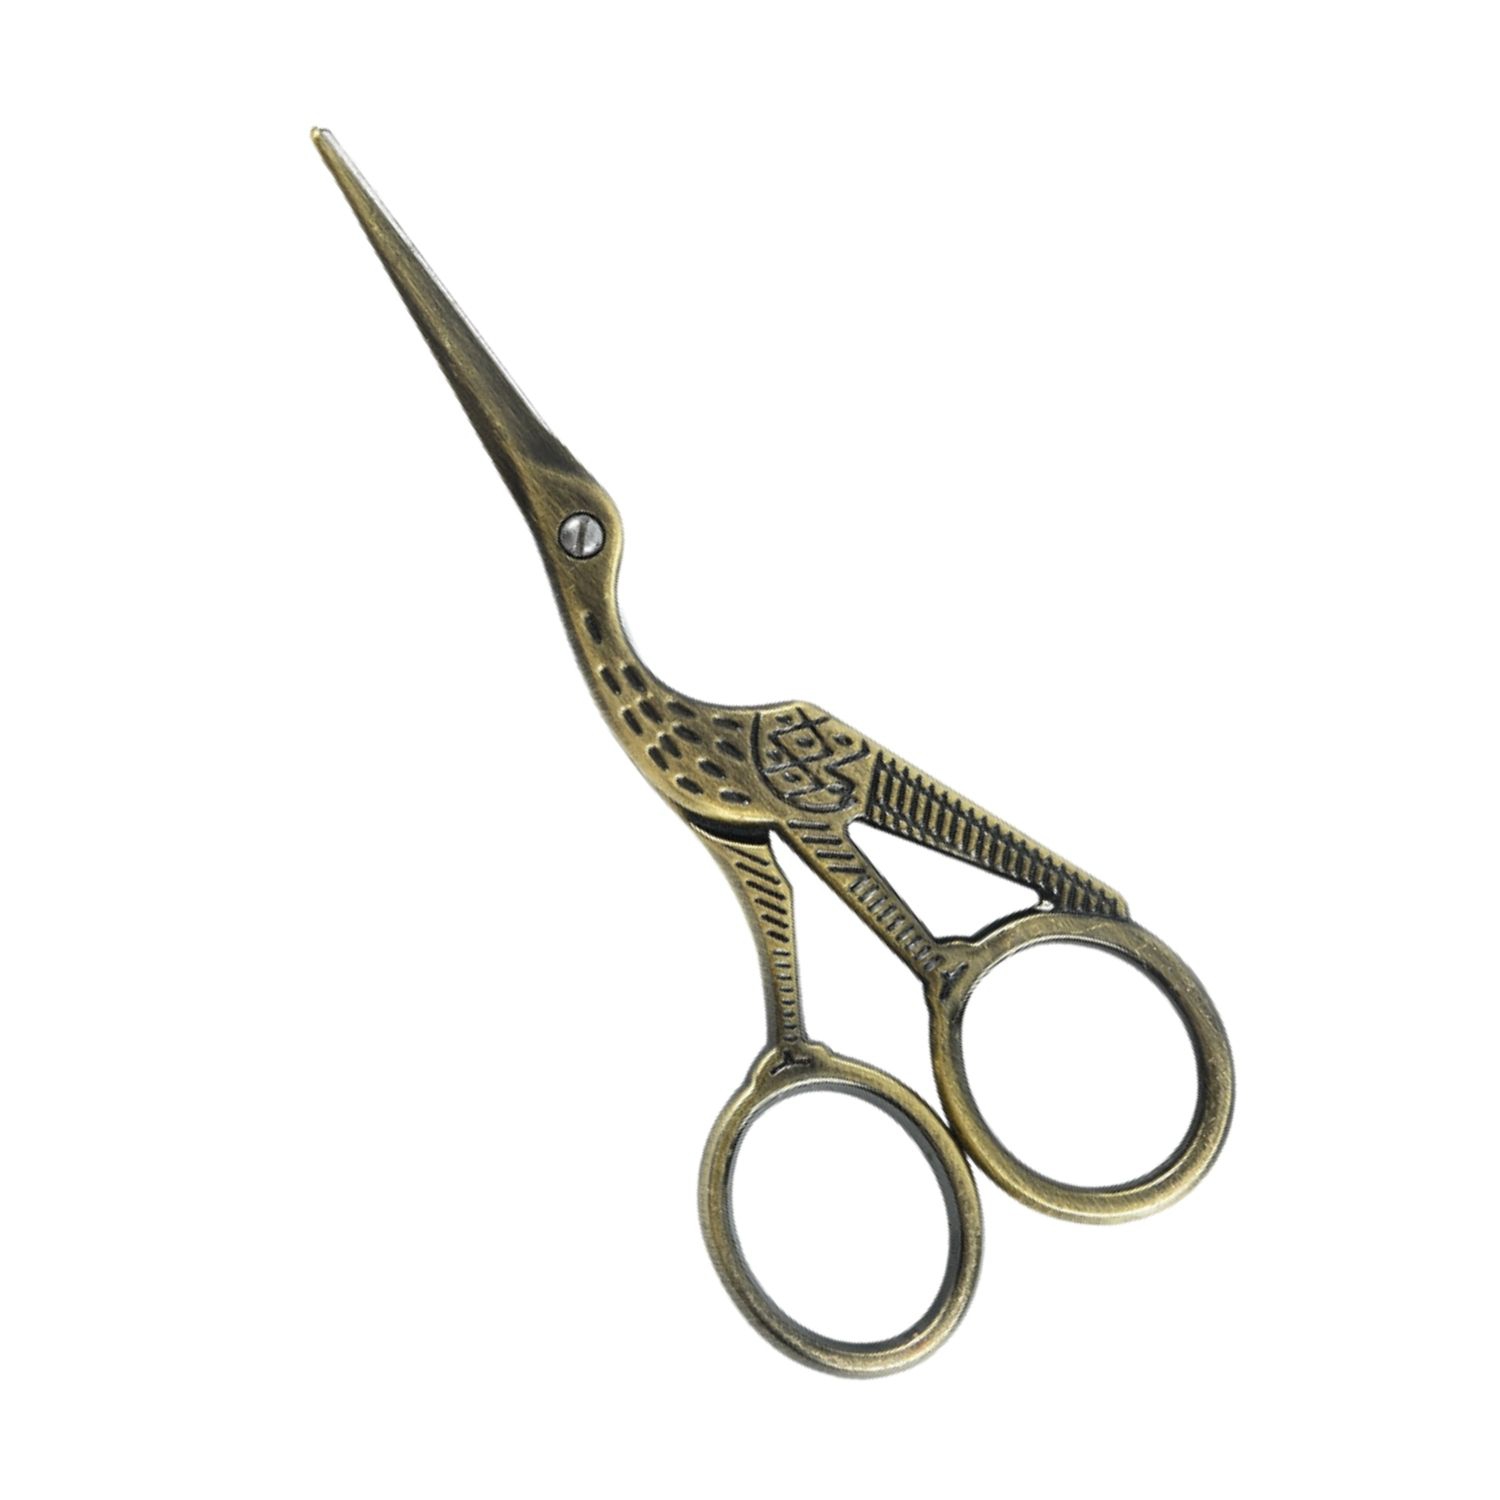 Arolly Retro Style 5.51" Embroidery Scissor with Sharp Blades, Multi-purpose Small Sewing Scissors for Art and Needle Work, Cutting Tools